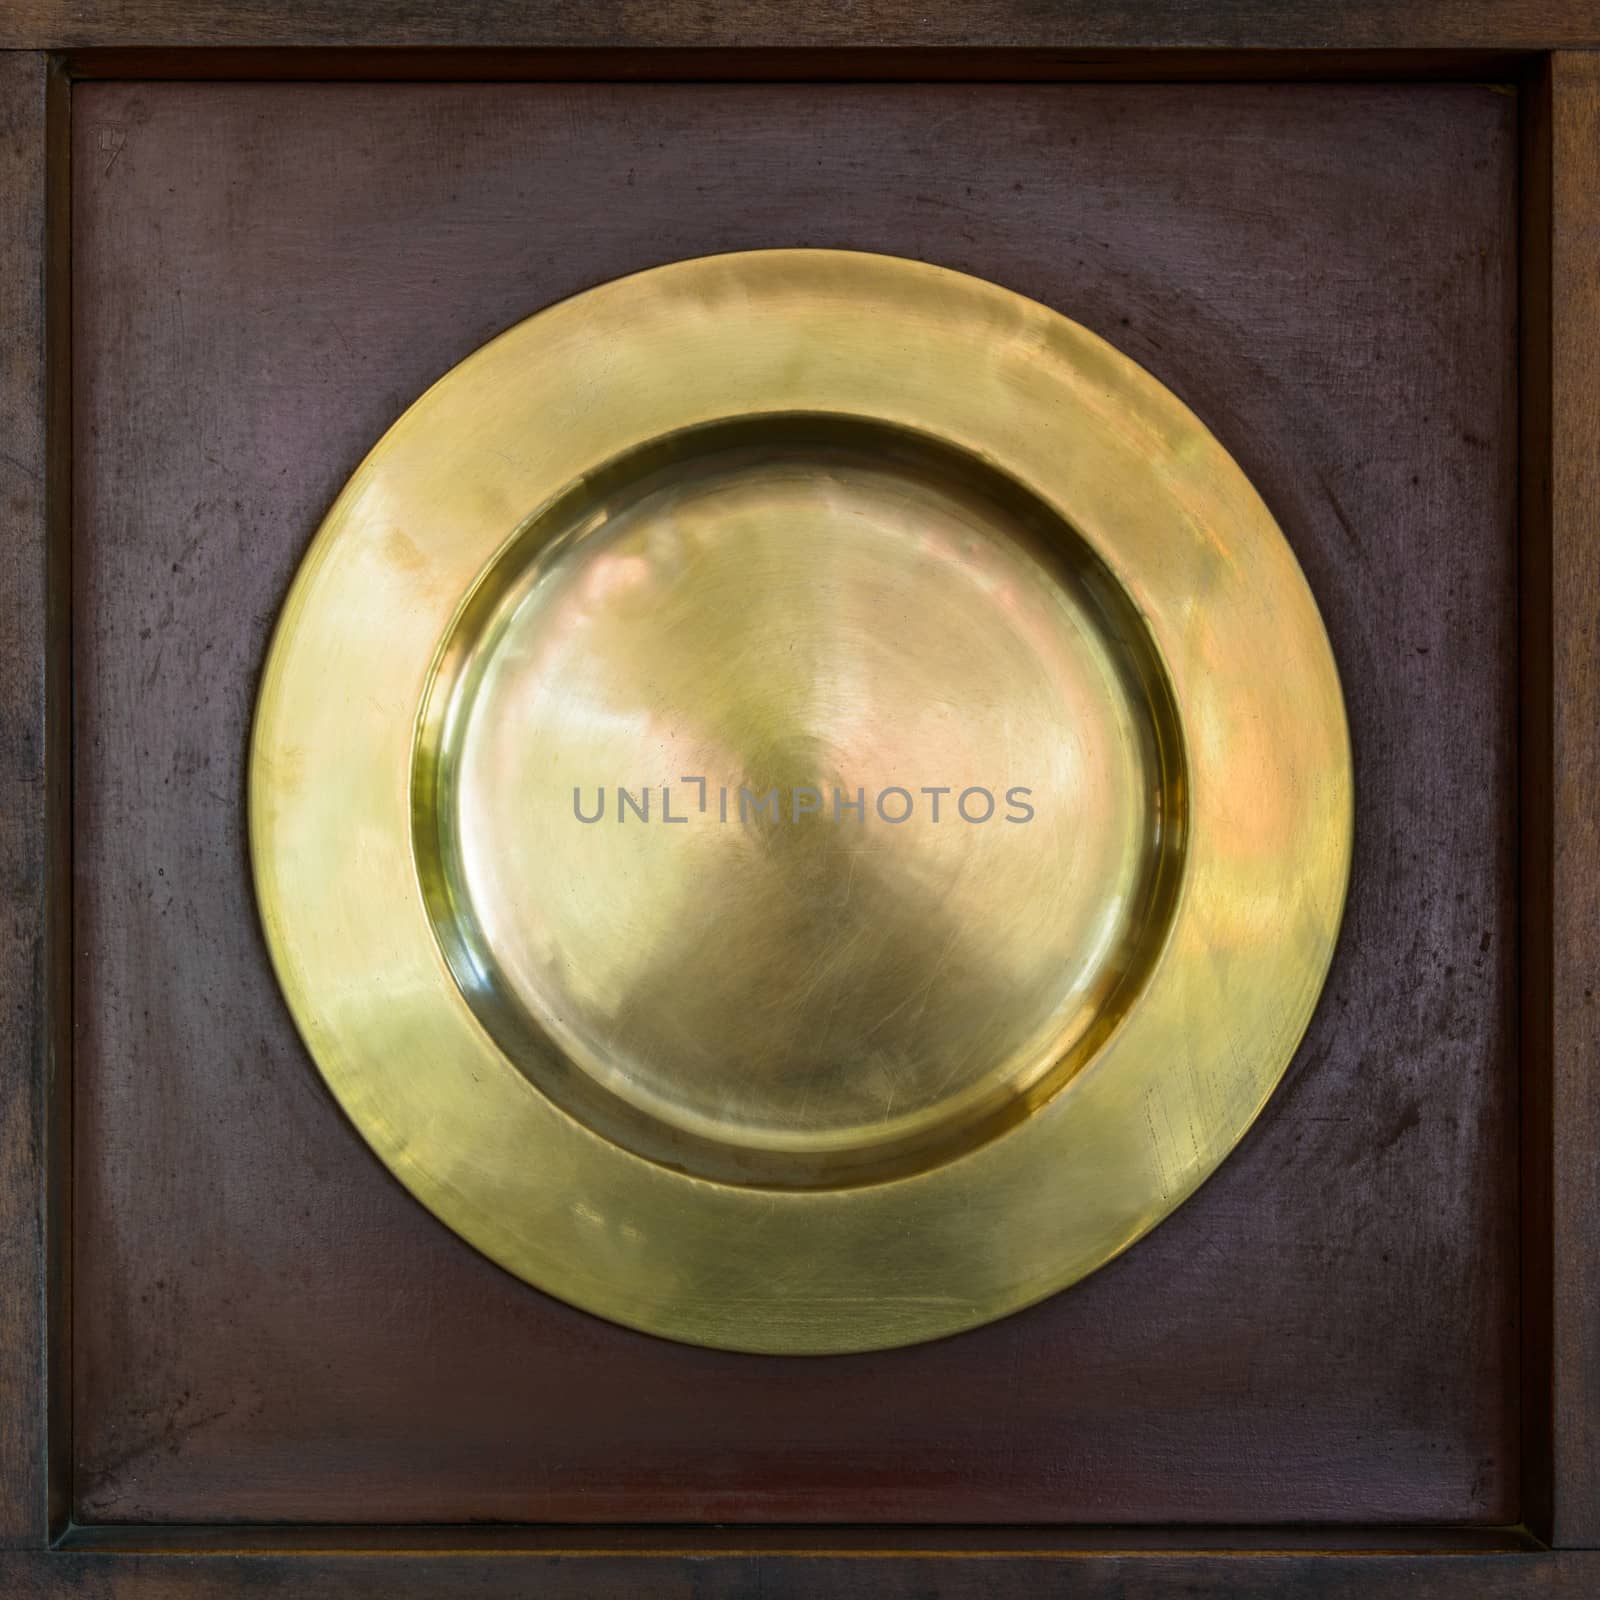 Brass plate on a square wooden background